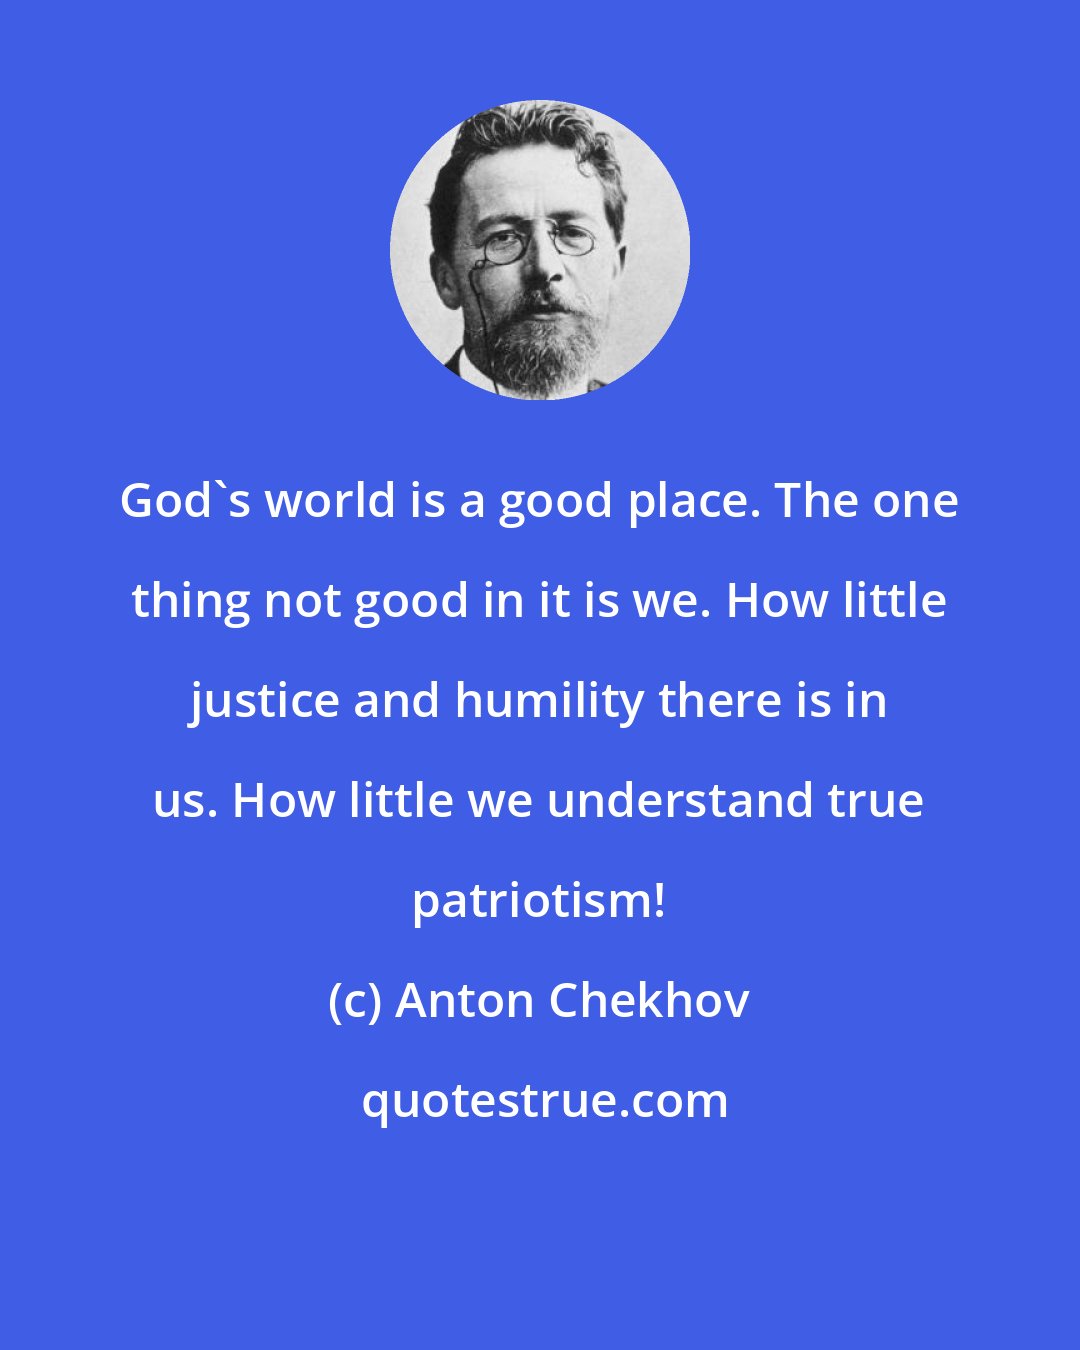 Anton Chekhov: God's world is a good place. The one thing not good in it is we. How little justice and humility there is in us. How little we understand true patriotism!